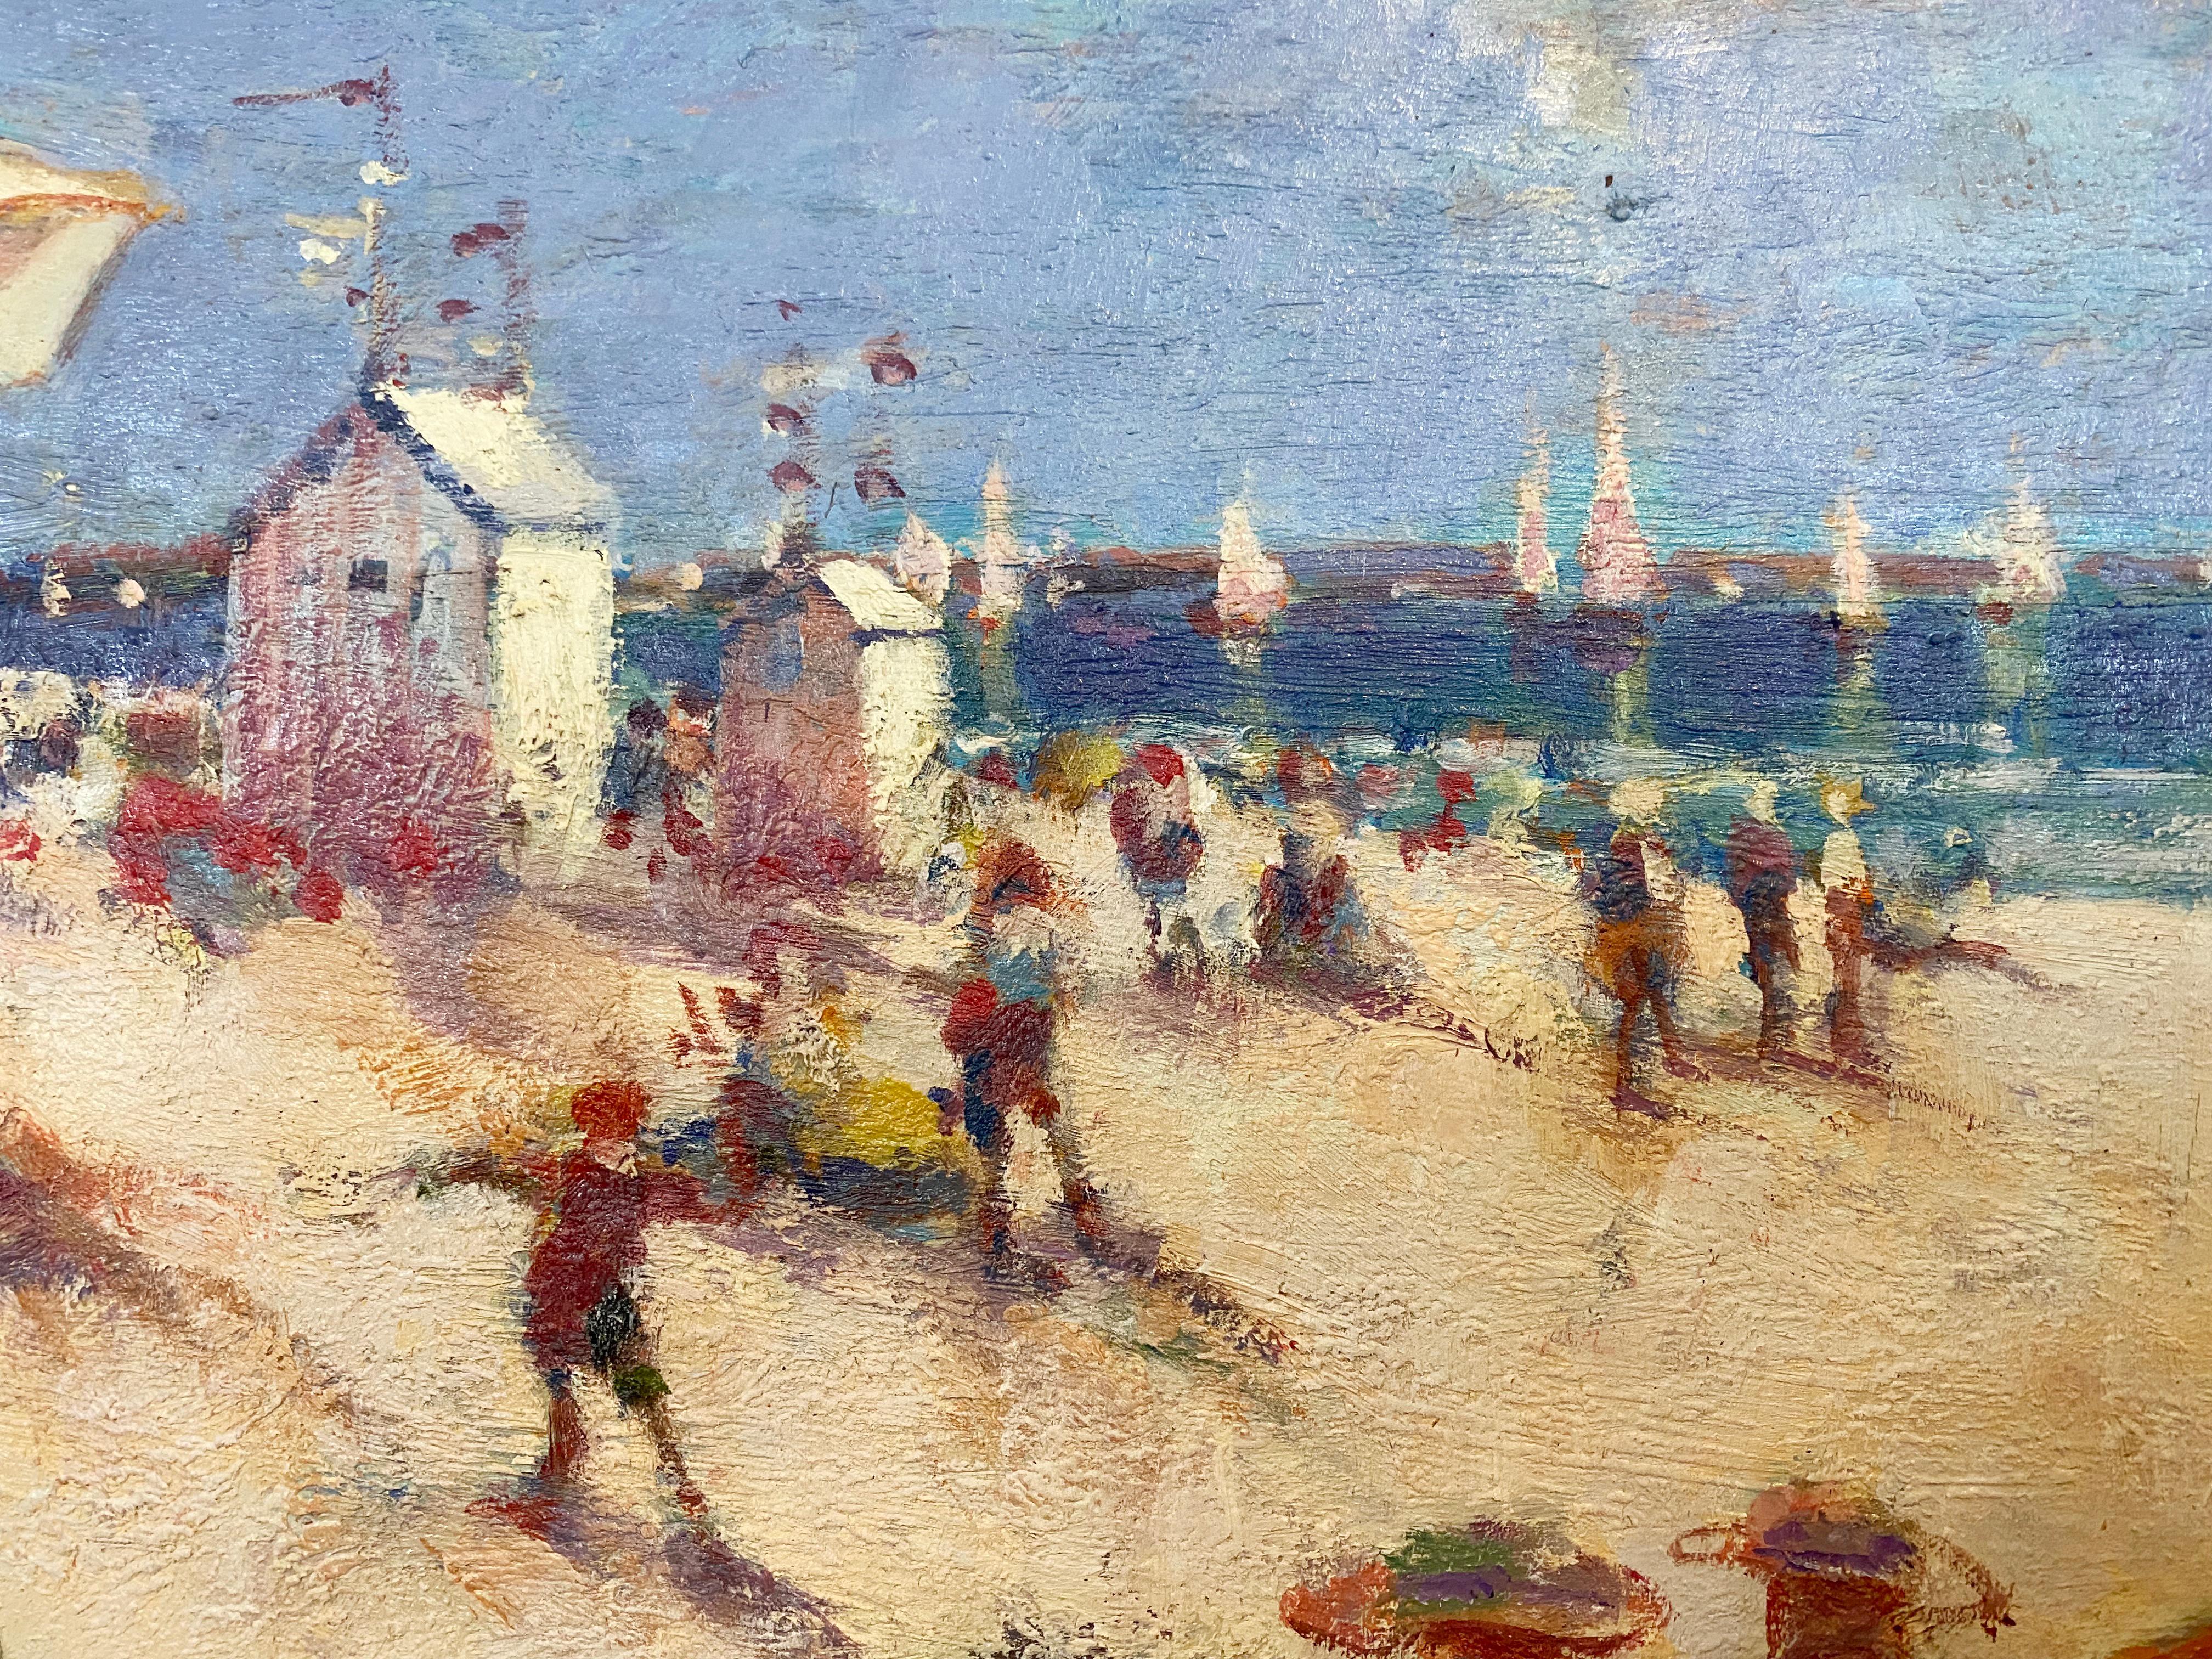 Many Umbrellas, Impressionist beach scene - Painting by Donald Roy Purdy